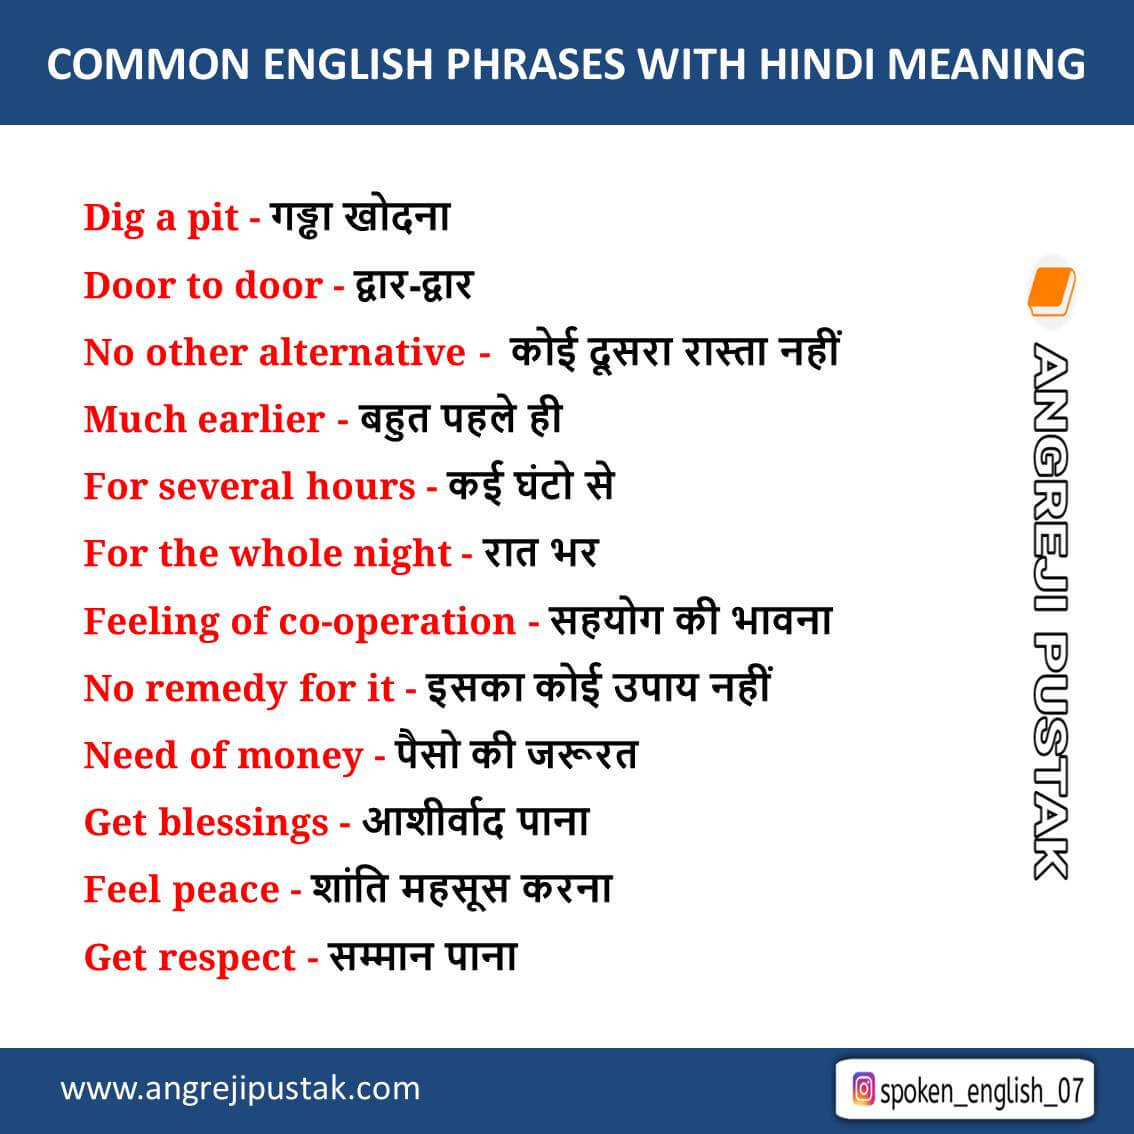 Phrases with Hindi meaning Common English Phrases